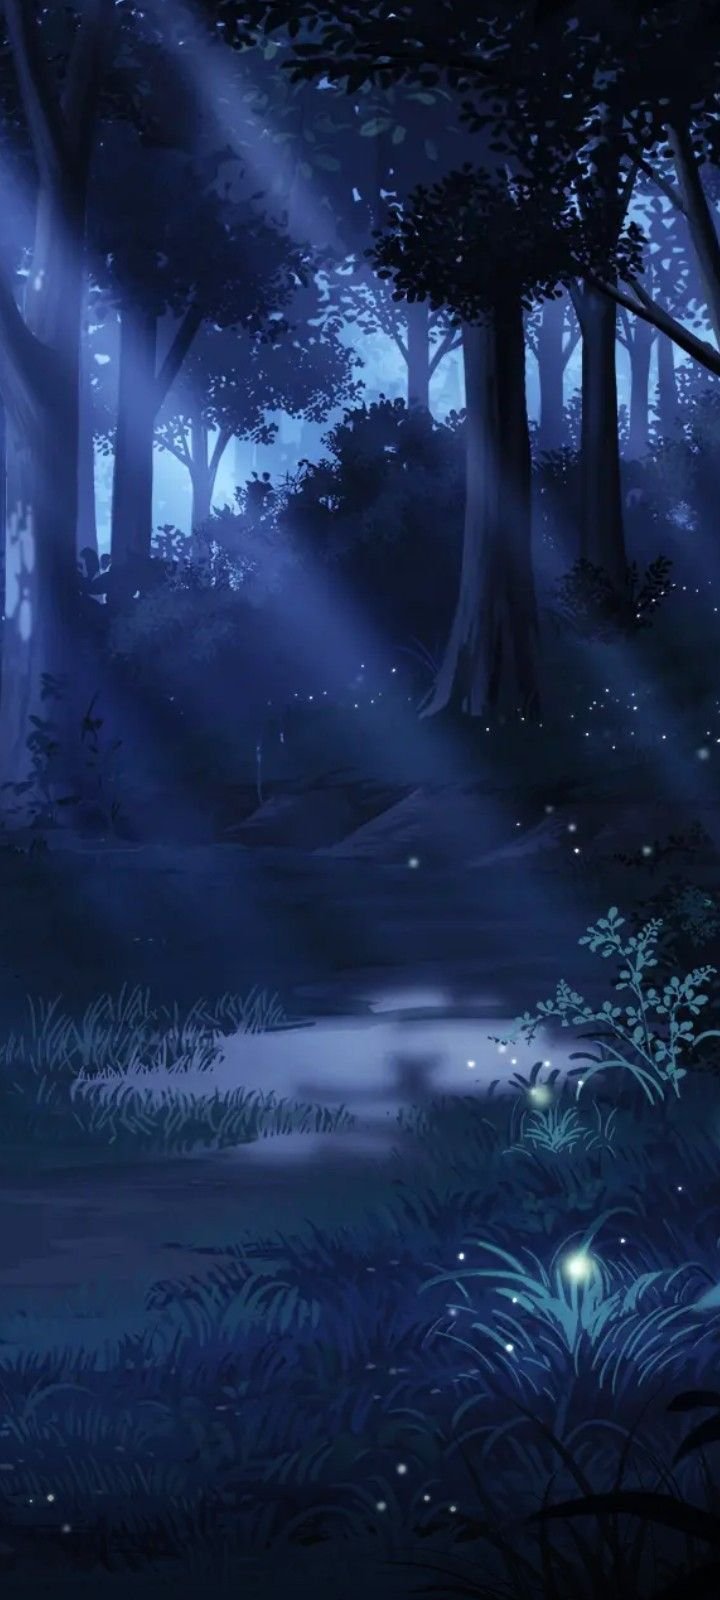 9770 Anime Background Forest Images Stock Photos  Vectors  Shutterstock